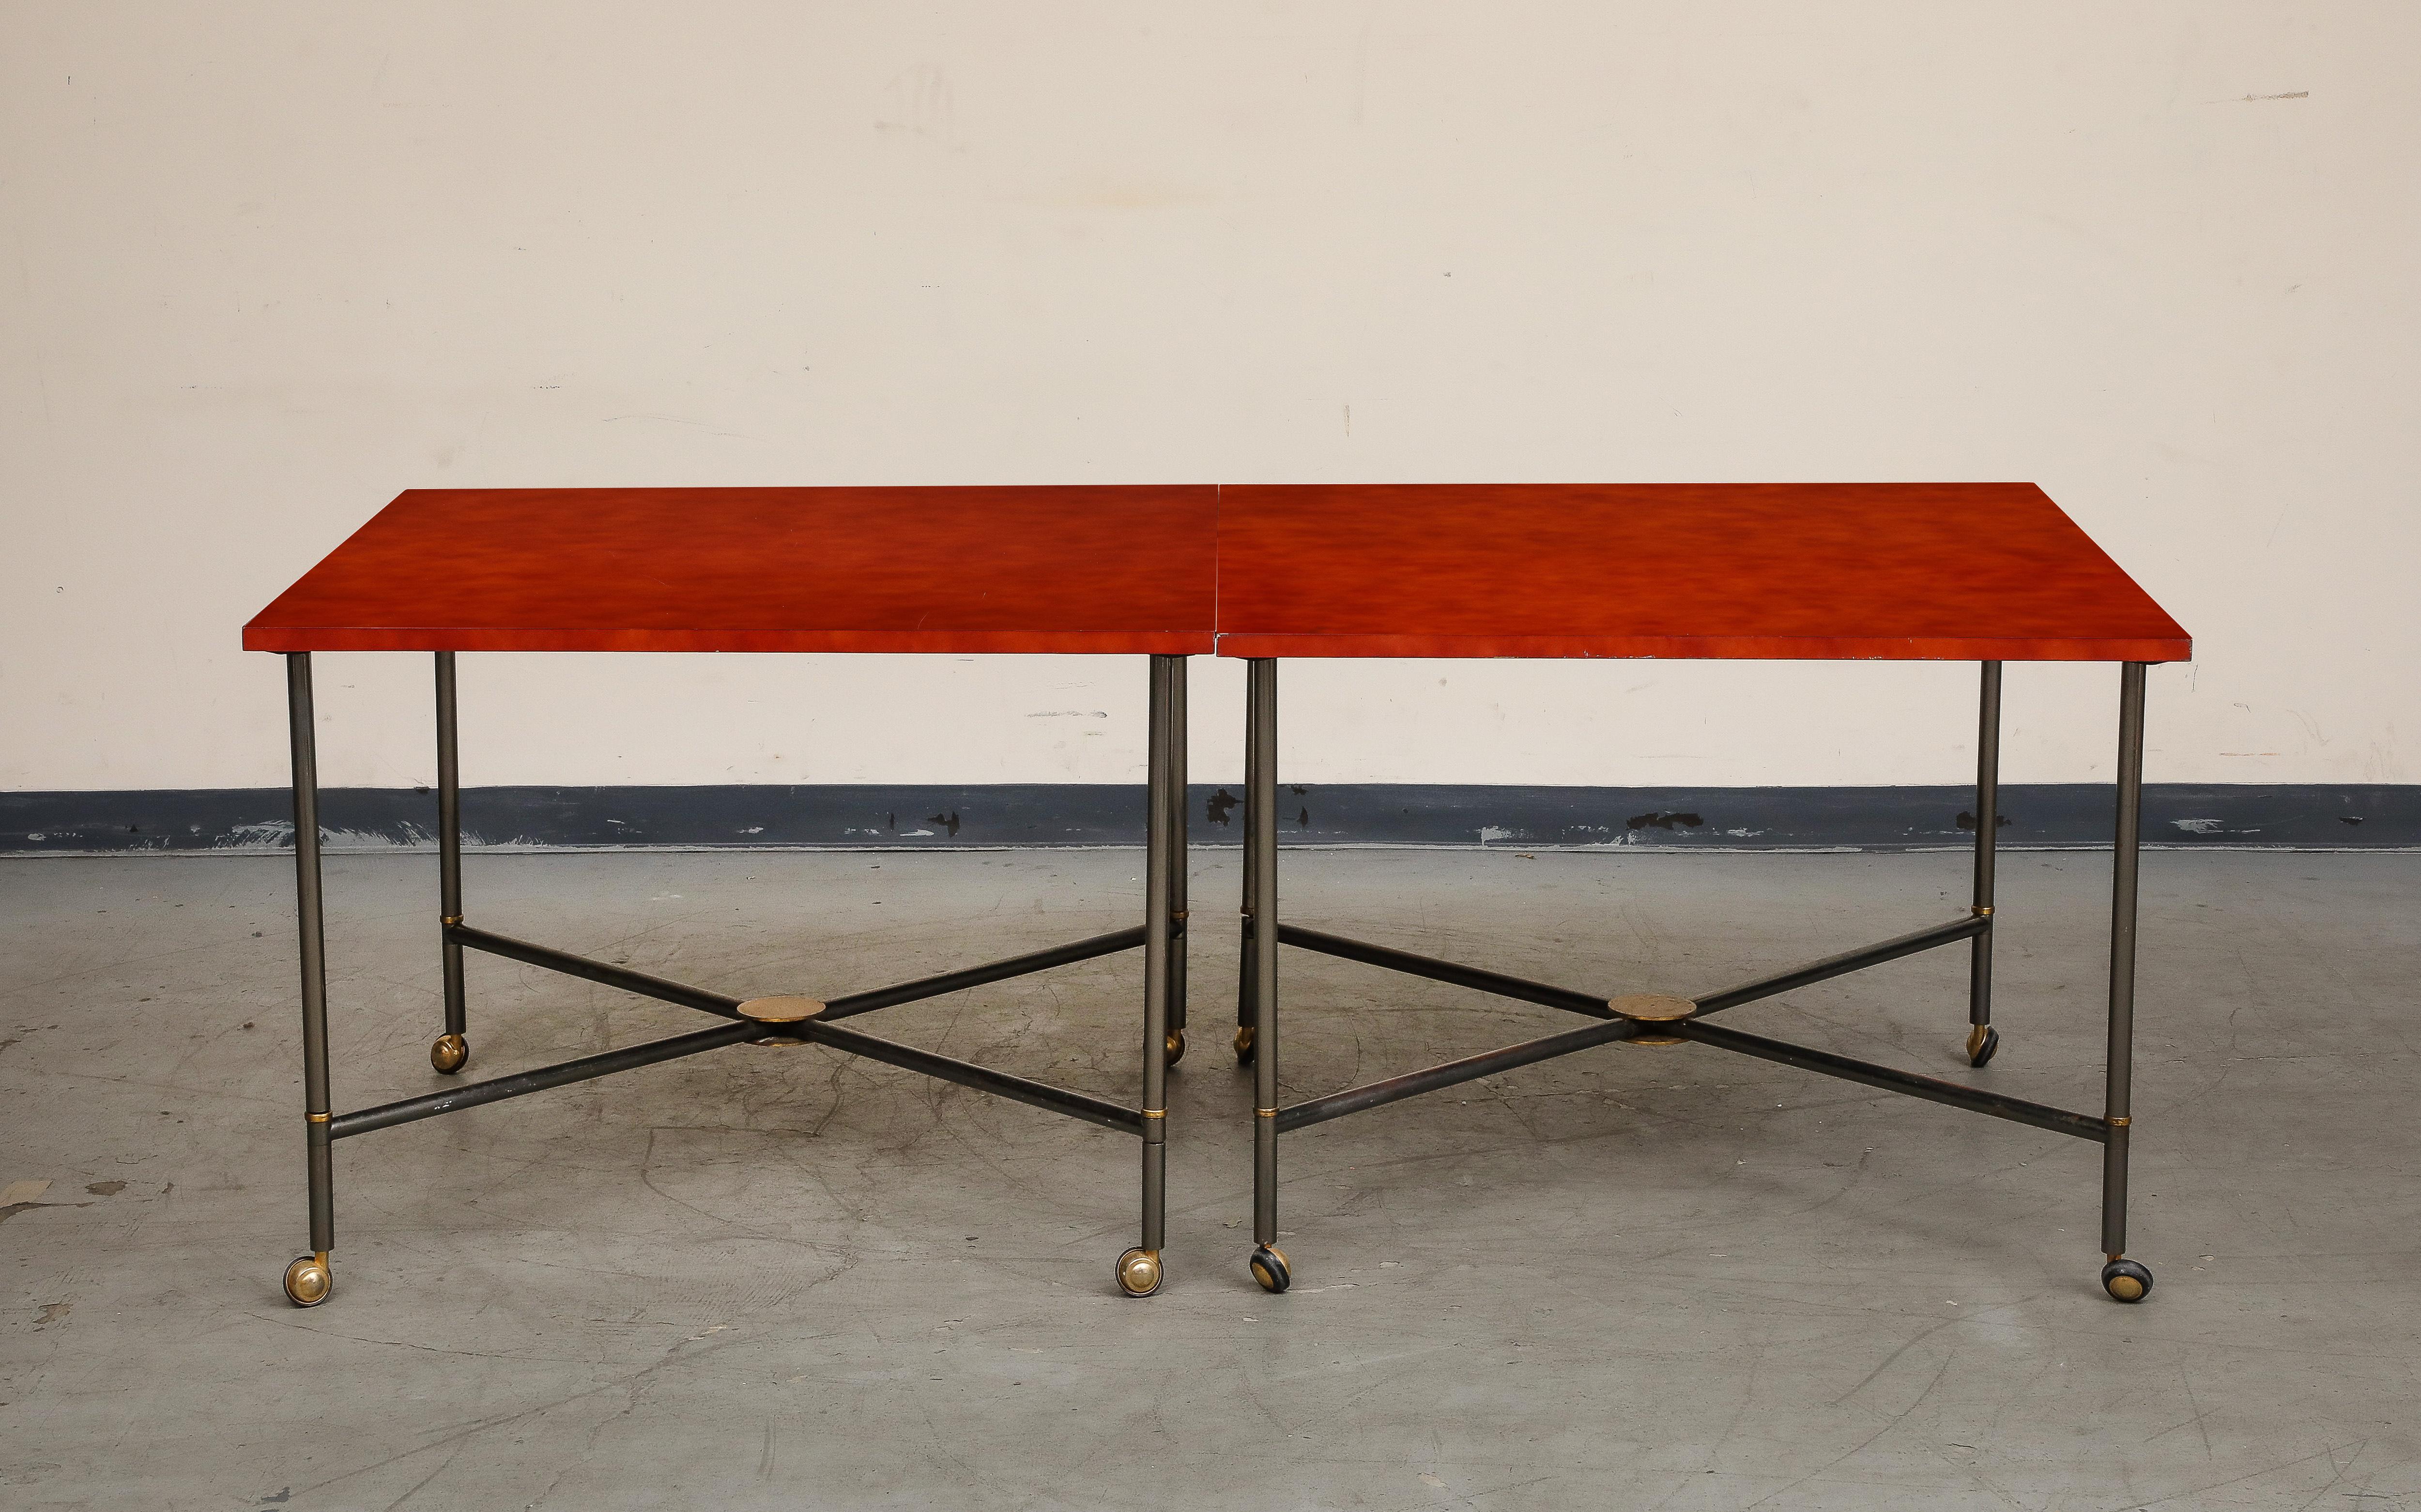 Midcentury bronze two-piece dining table on casters with red lacquer top and brass accents. Two squares join to form a longer rectangular table; there are additional pieces that could extend to an oval, however, the attachment pieces seem to be